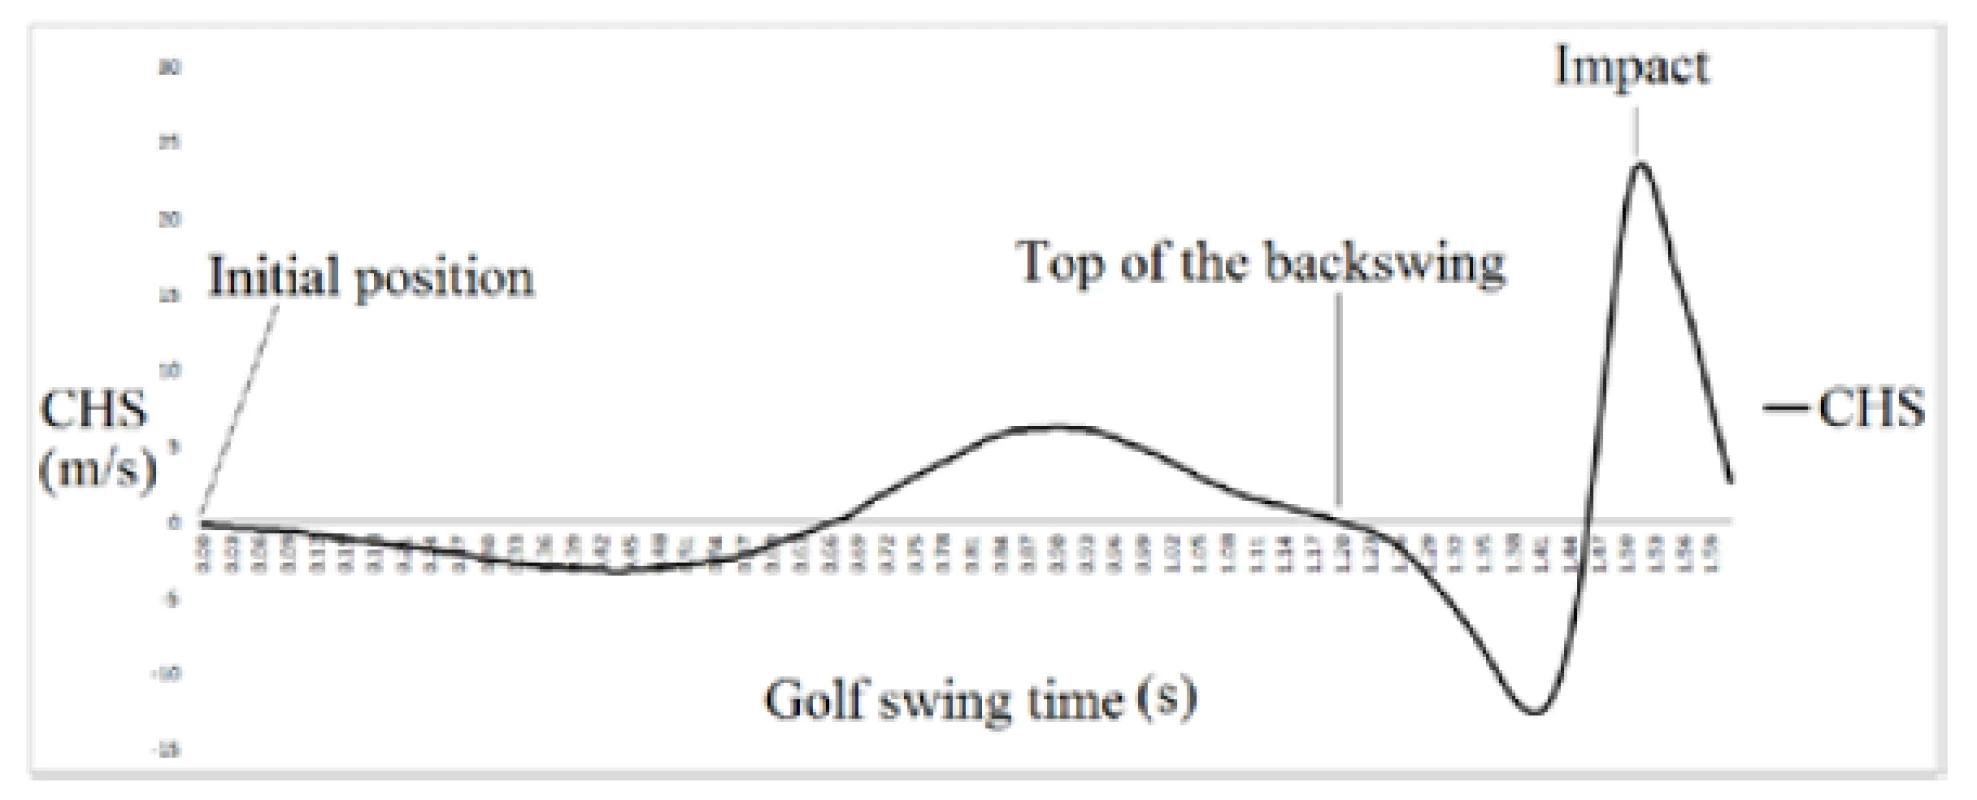 Club head speed profile in x-axis during the golf swing.